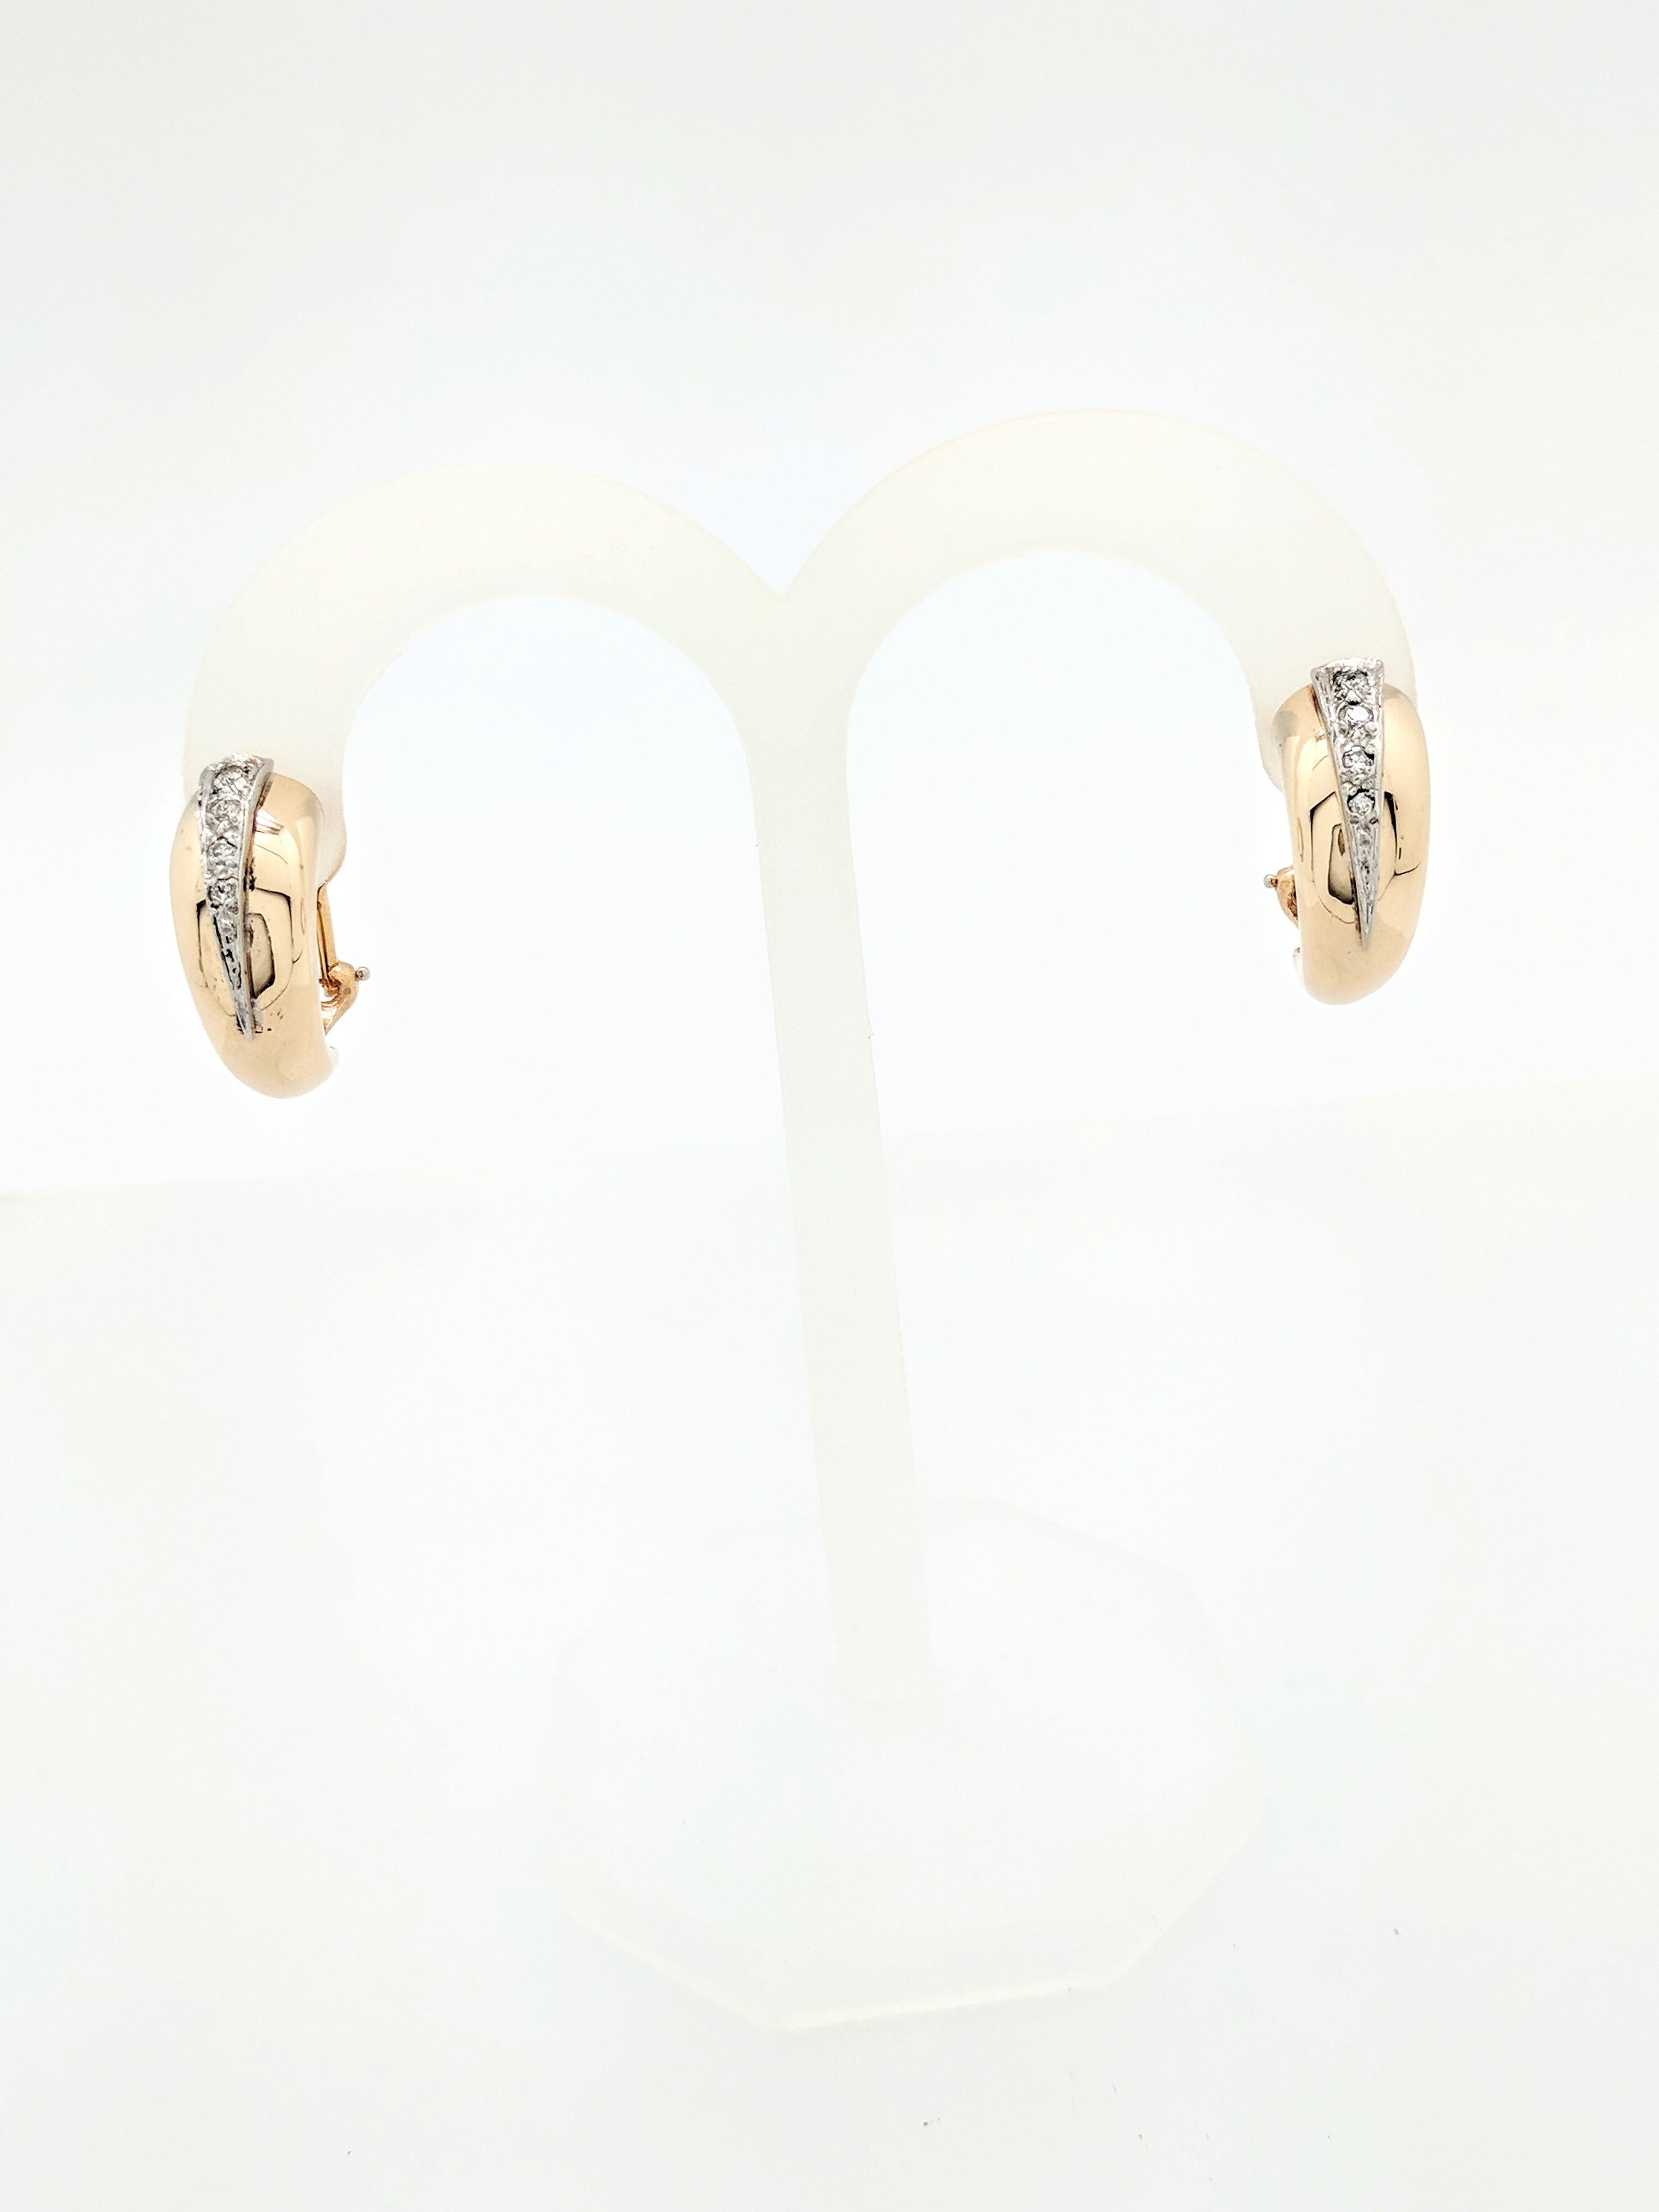 You are viewing a beautiful pair of ladies diamond half hoop leverback earrings. These earrings are crafted from 14k yellow gold and weigh 6.6 grams. They measures 21mm in length and 8mm in width. Each earring features (4) natural round brilliant